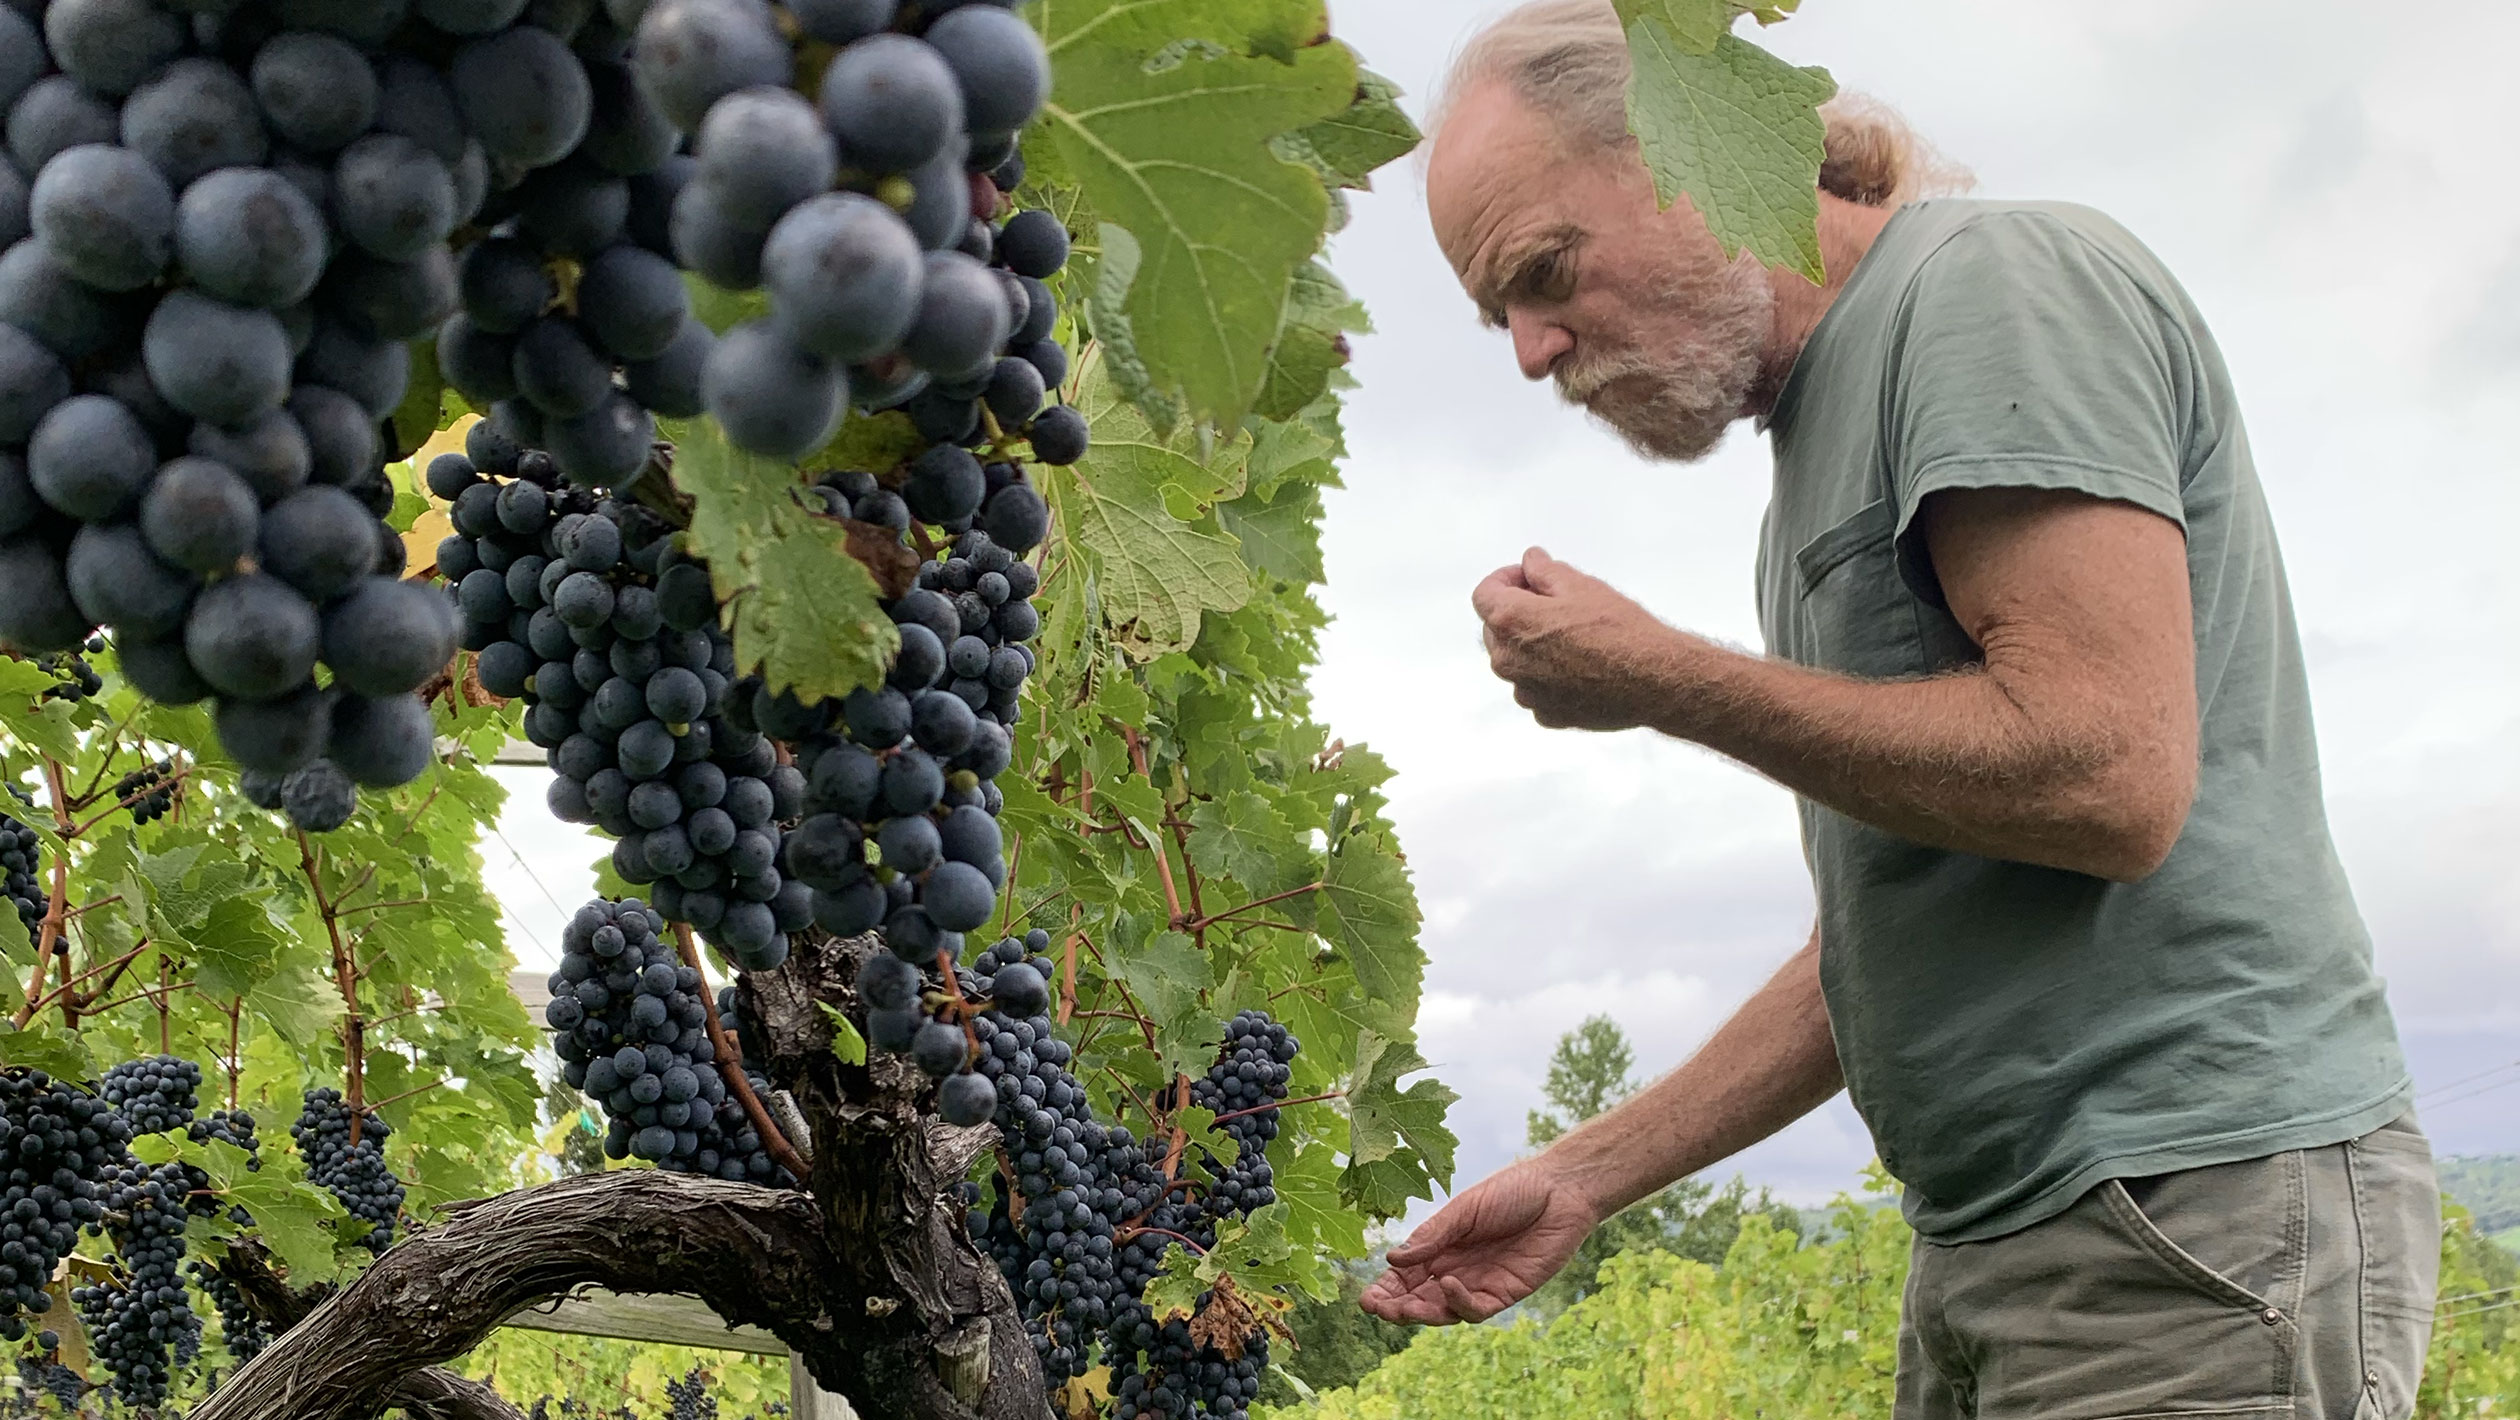 Jim Law, cofounder of Linden Vineyards, examines grapes in the vineyard